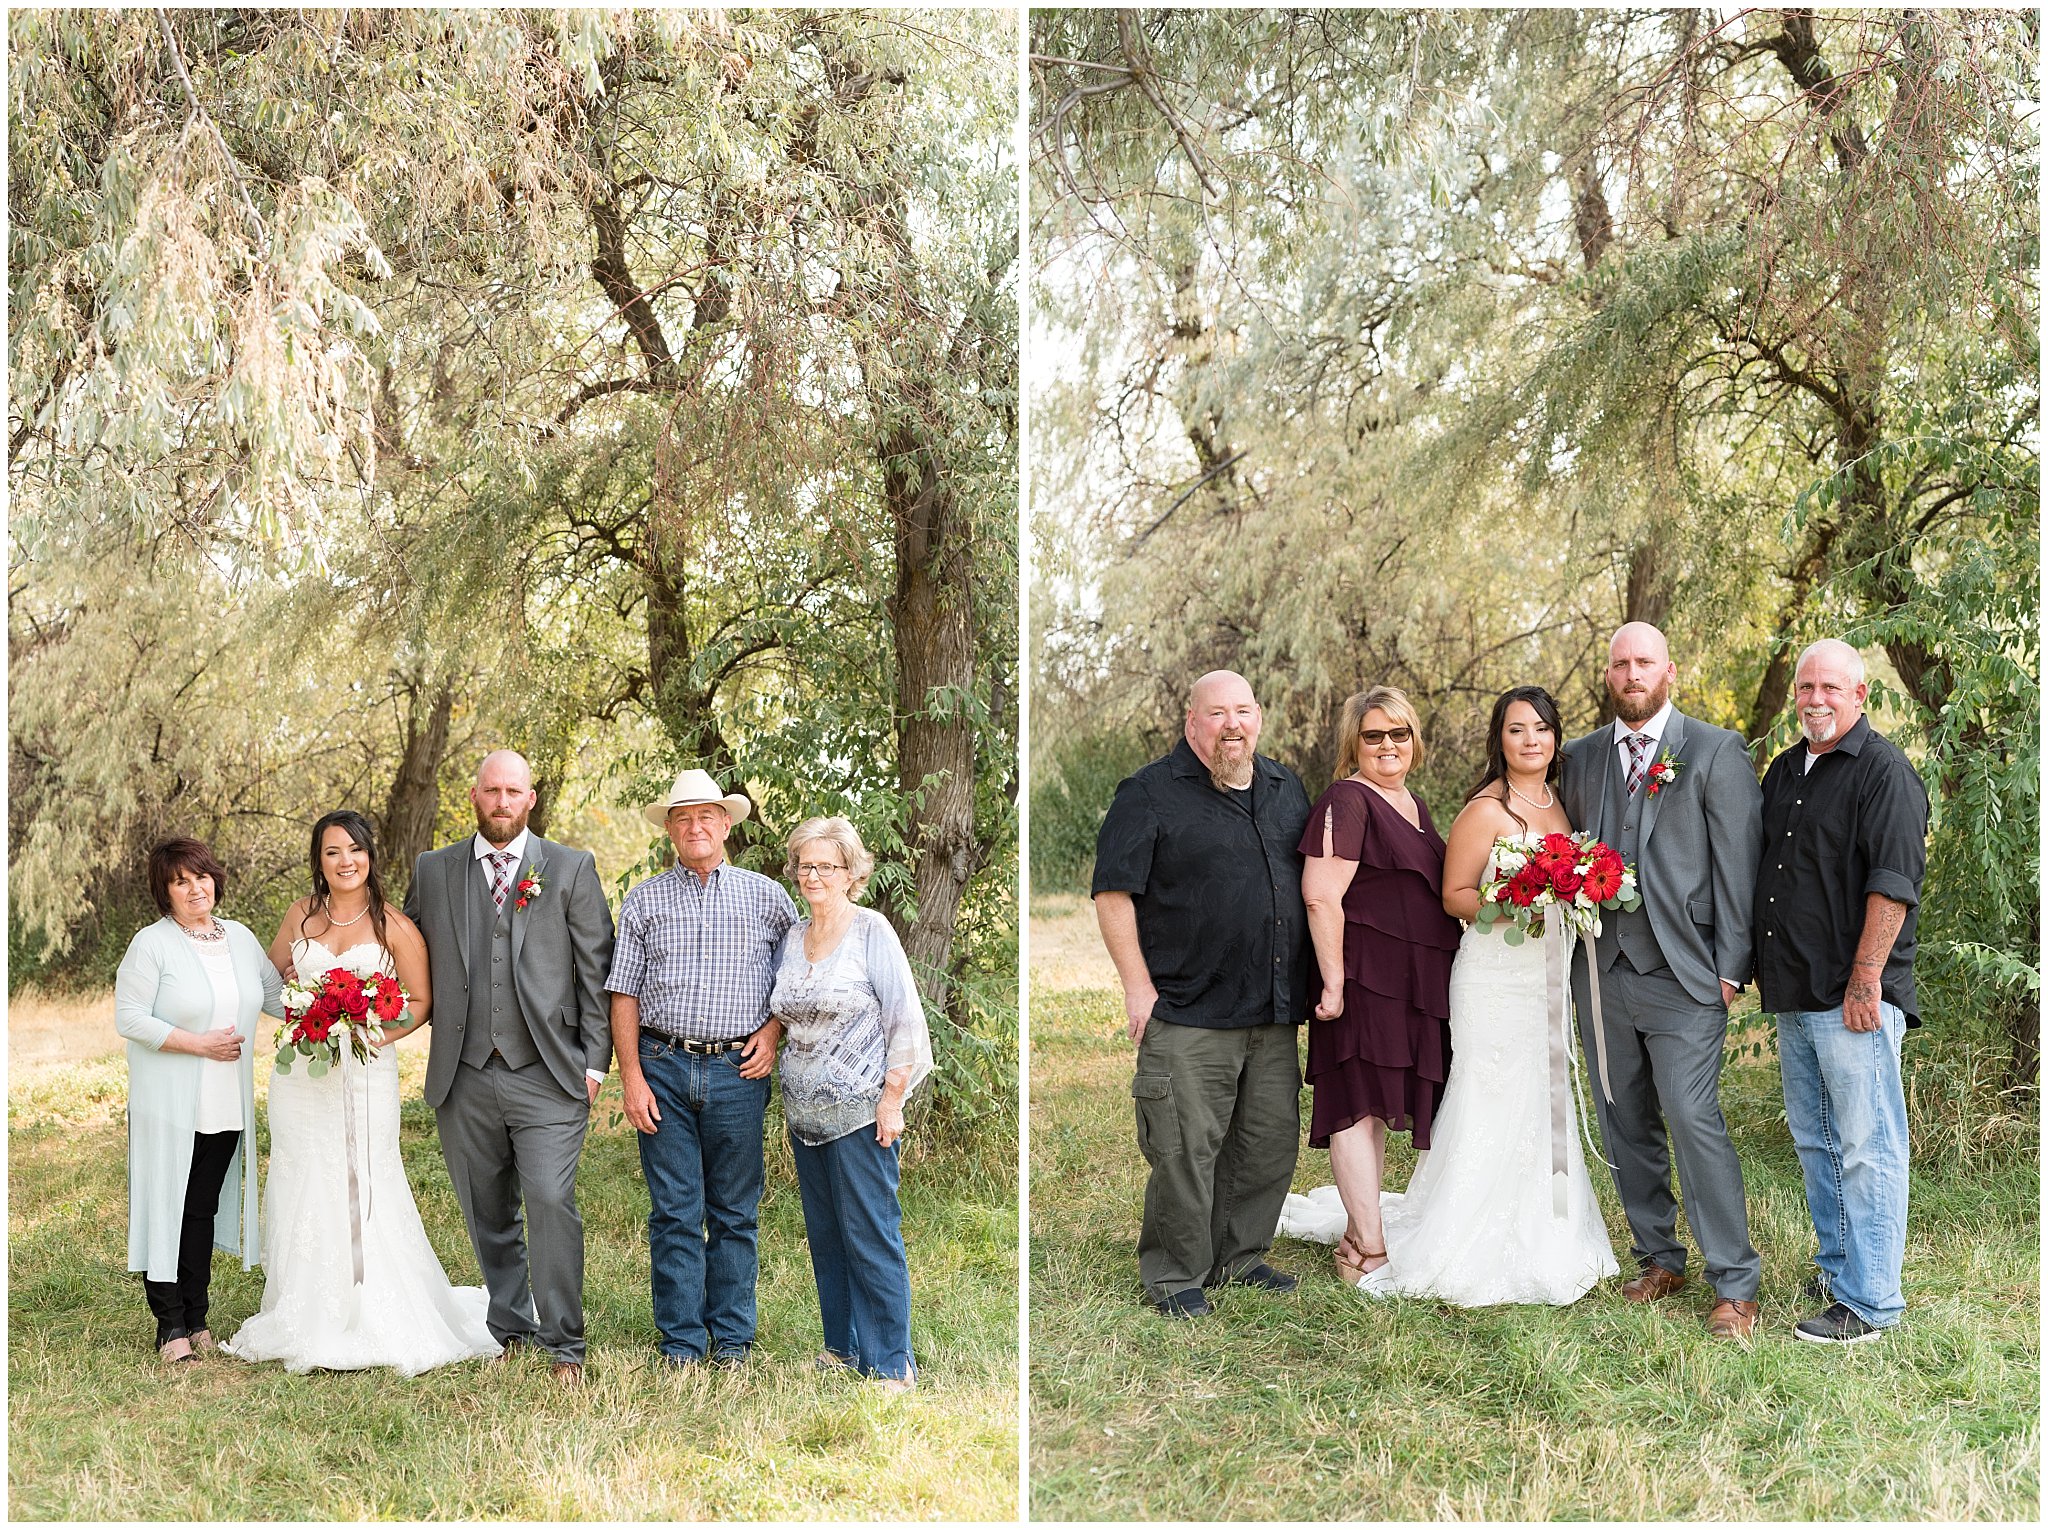 Bride, groom, grandparents and parents | Red and Grey wedding | Davis County Outdoor Wedding | Jessie and Dallin Photography